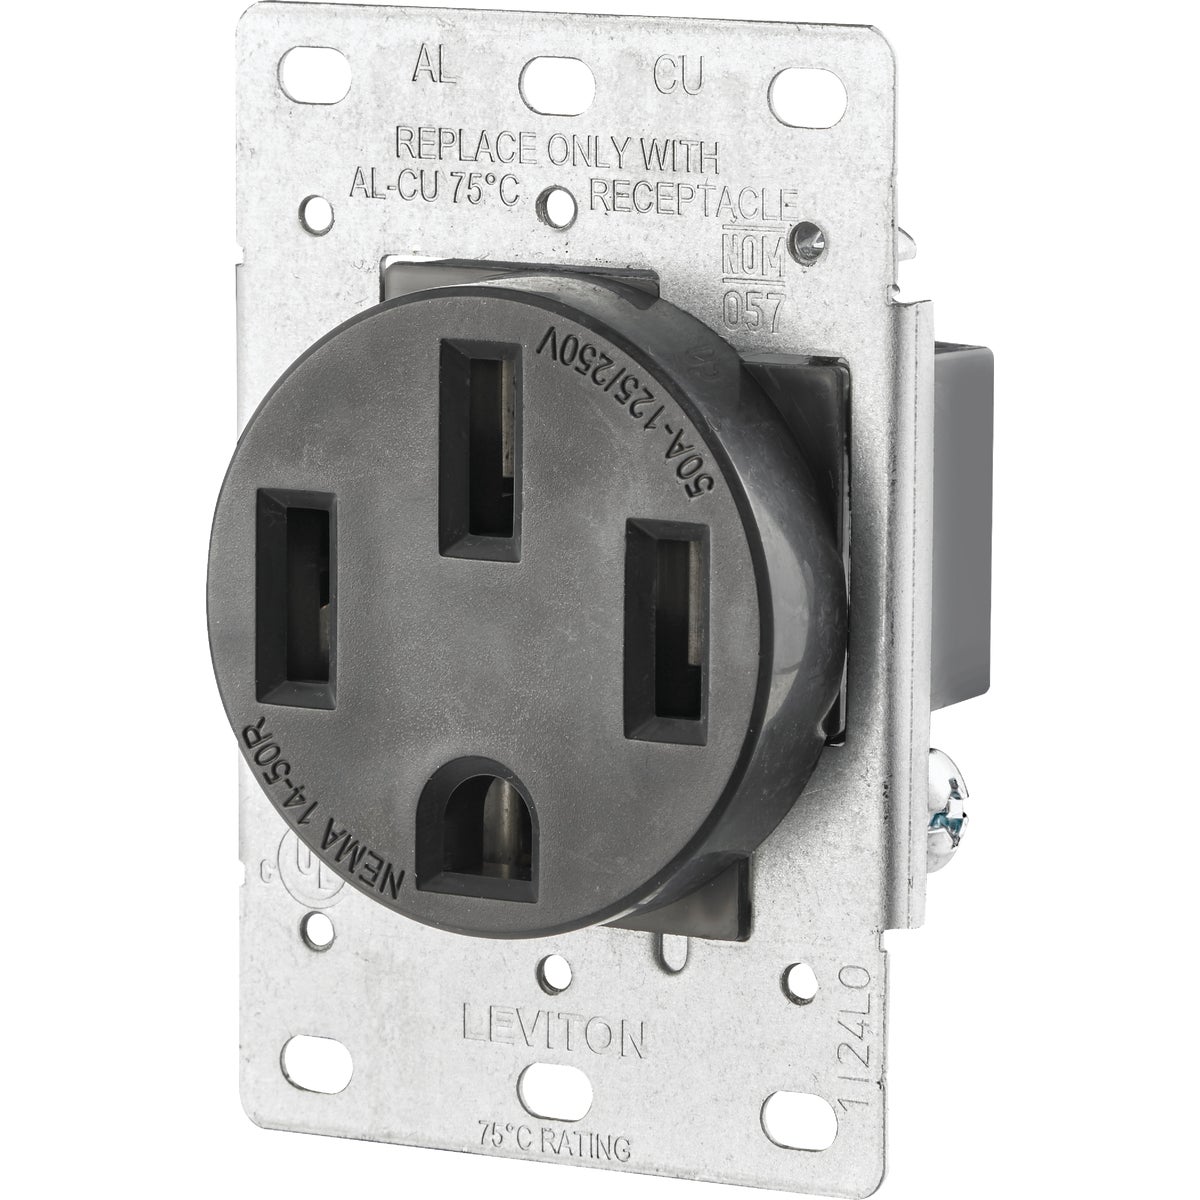 Item 524336, 3-pole, 4-wire grounding outlet for ranges.